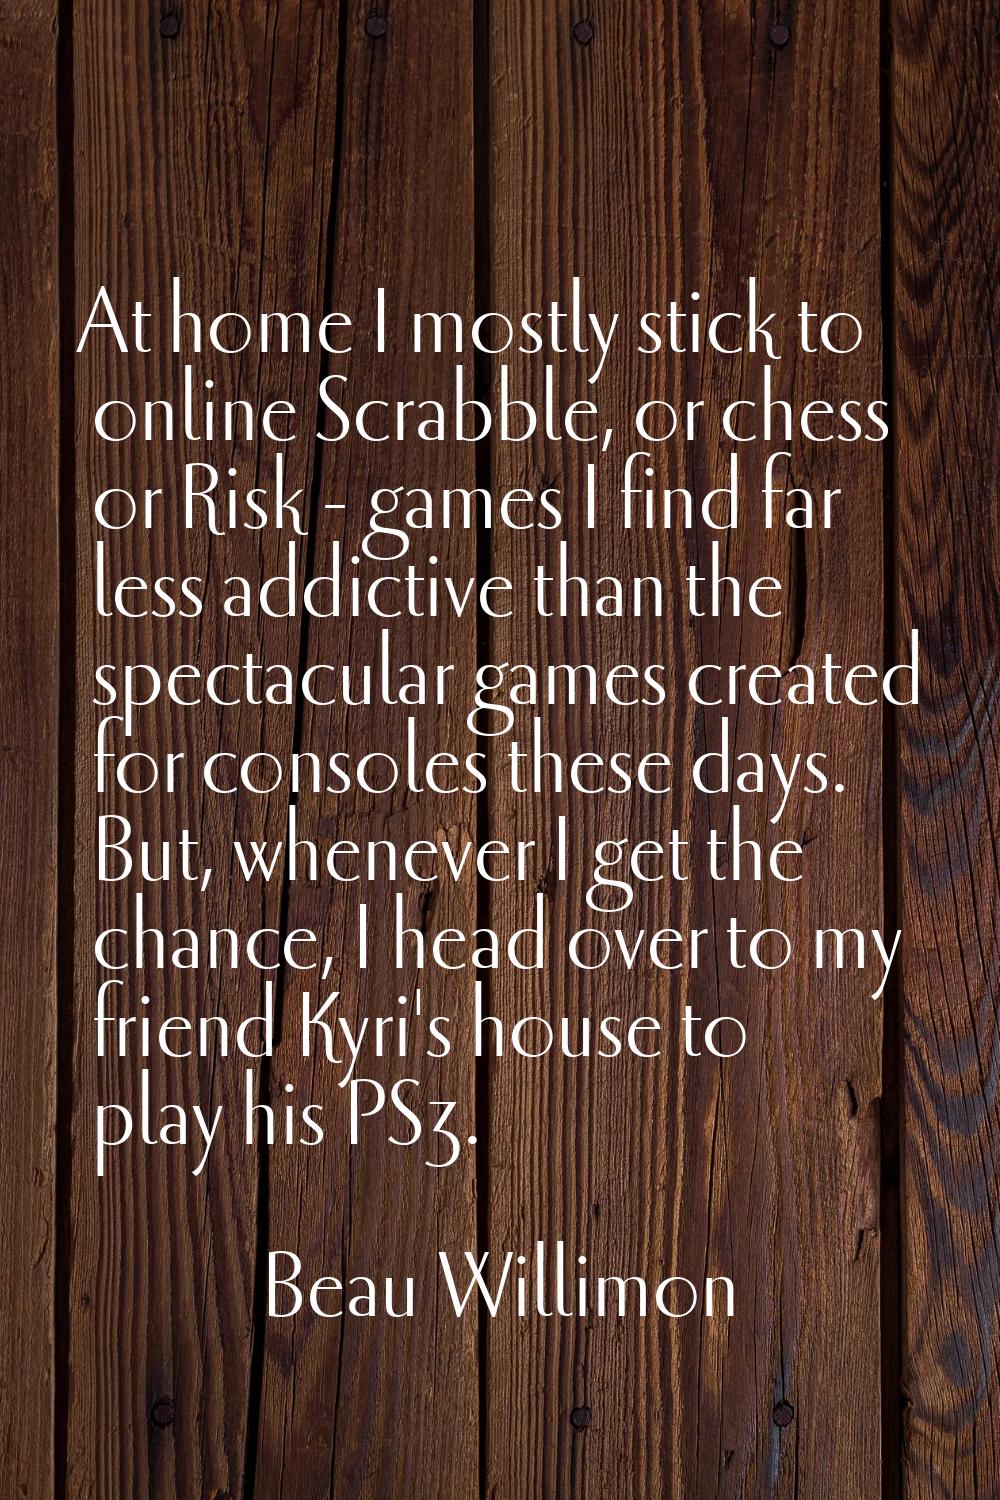 At home I mostly stick to online Scrabble, or chess or Risk - games I find far less addictive than 